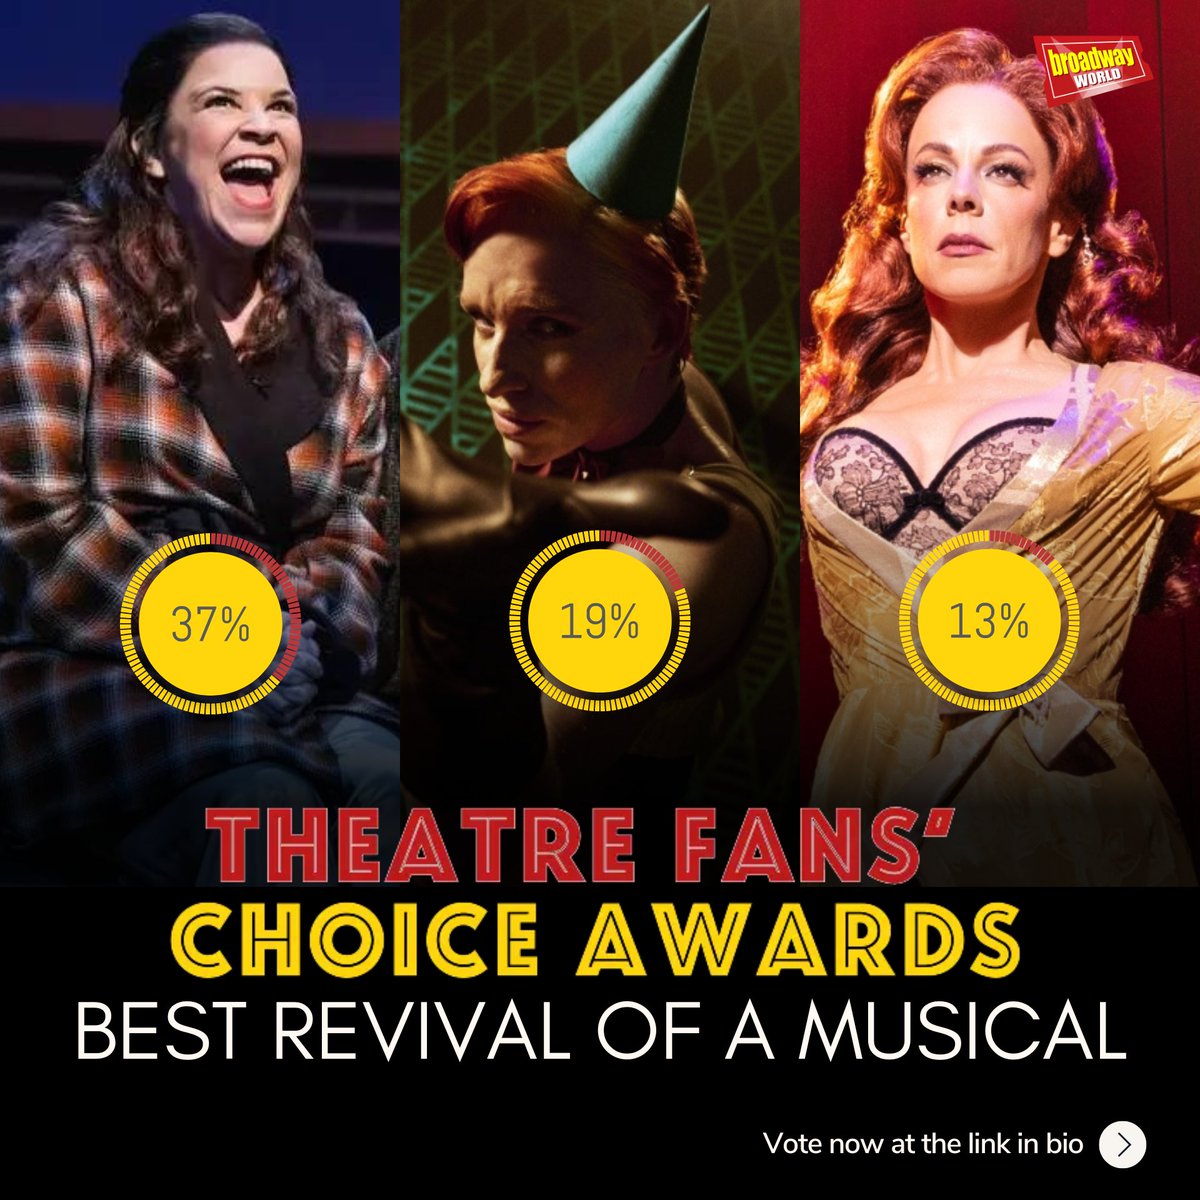 Vote now: bway.world/u2i4a This Broadway season was stacked with reimagined revivals of our most beloved musicals, but which production stood above the rest? Vote for your favorite productions in the BroadwayWorld Theatre Fans' Choice Awards. Voting closes June 2.